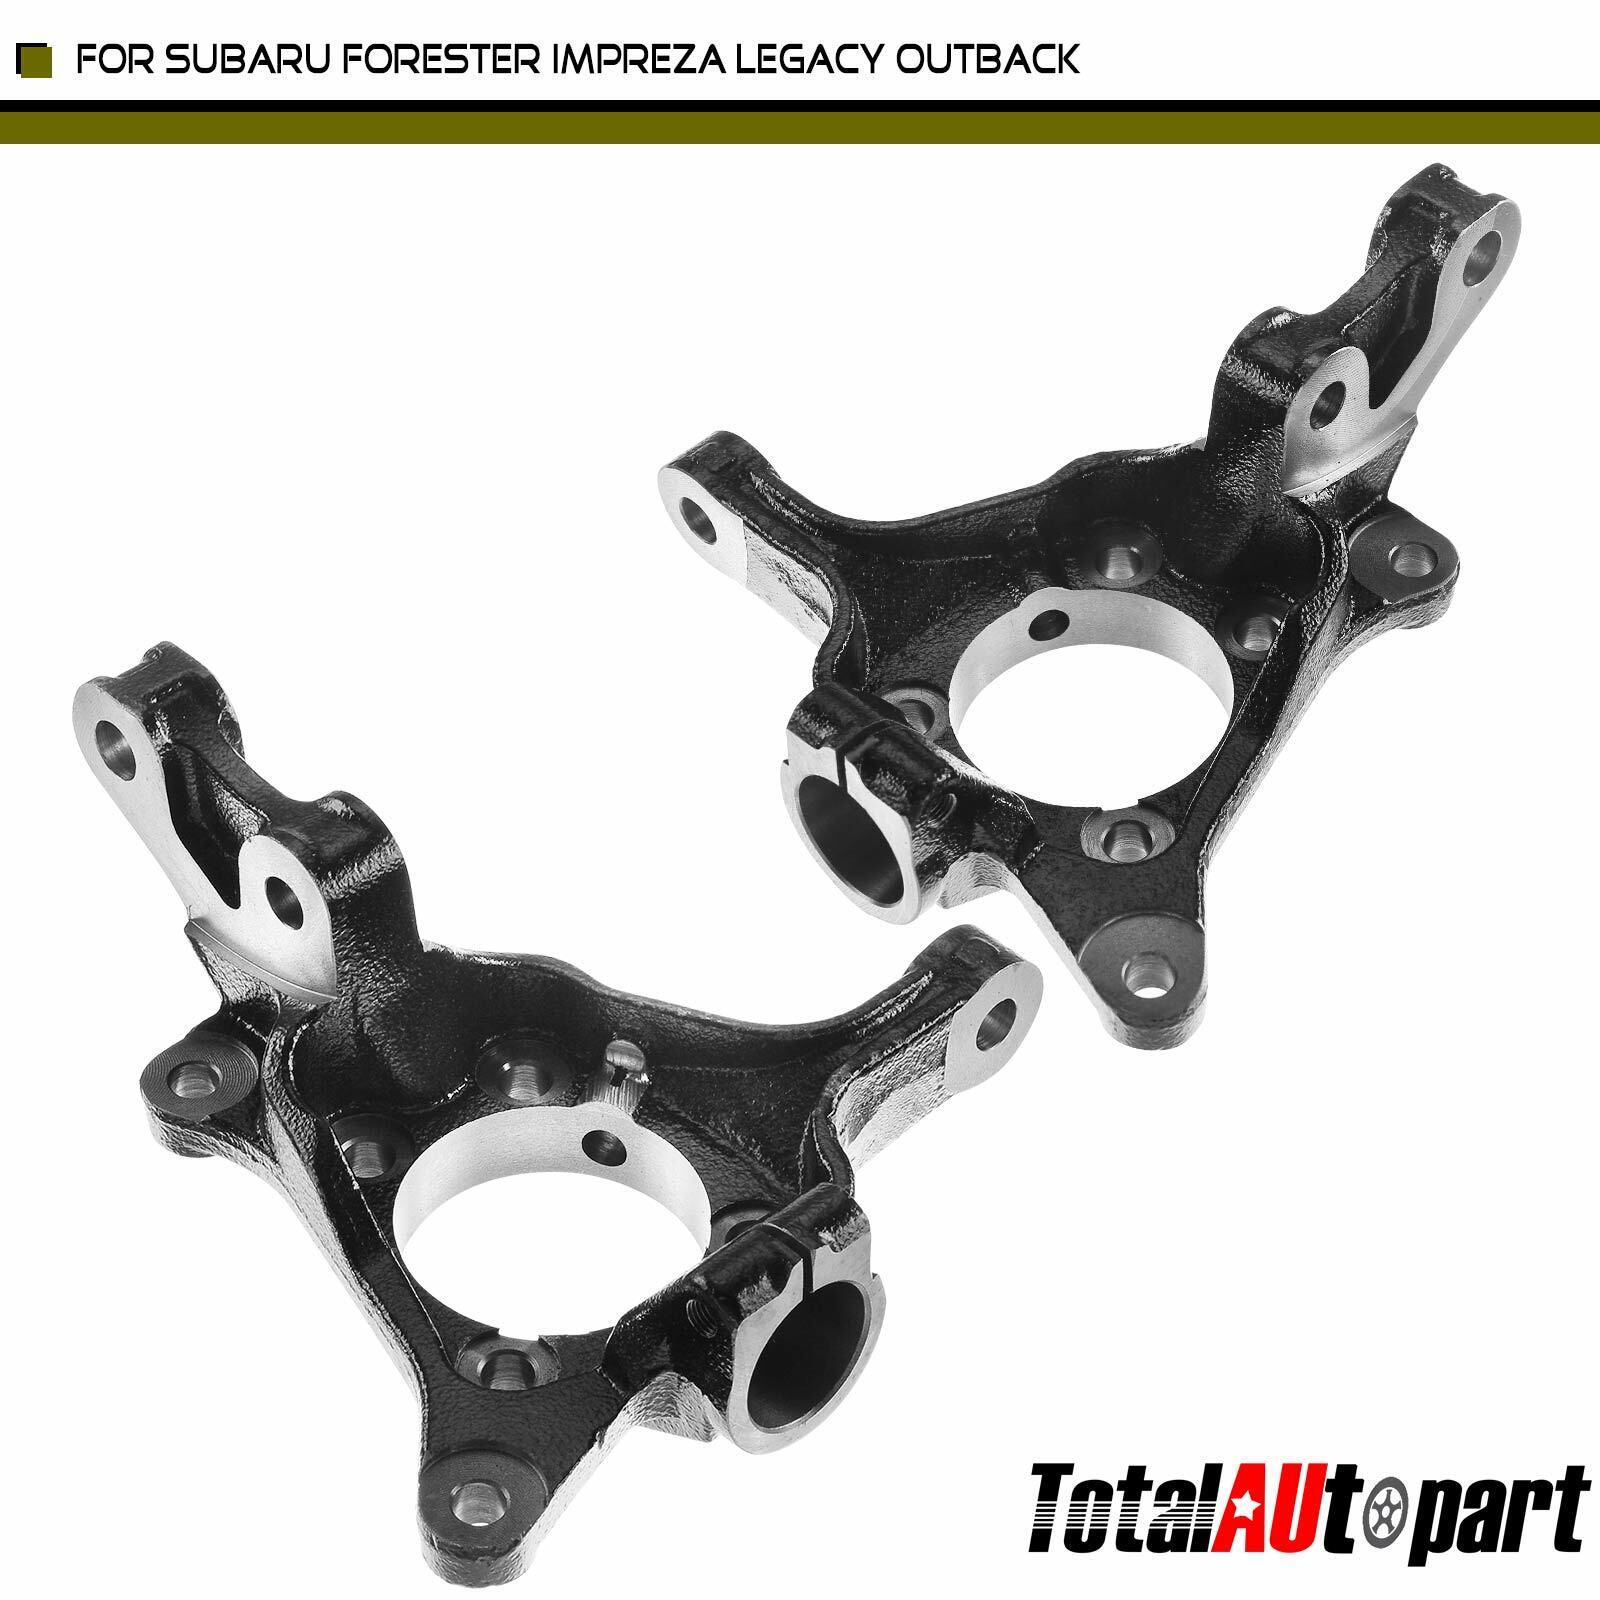 2x Steering Spindle Knuckles Front for Subaru Forester Impreza Legacy Outback